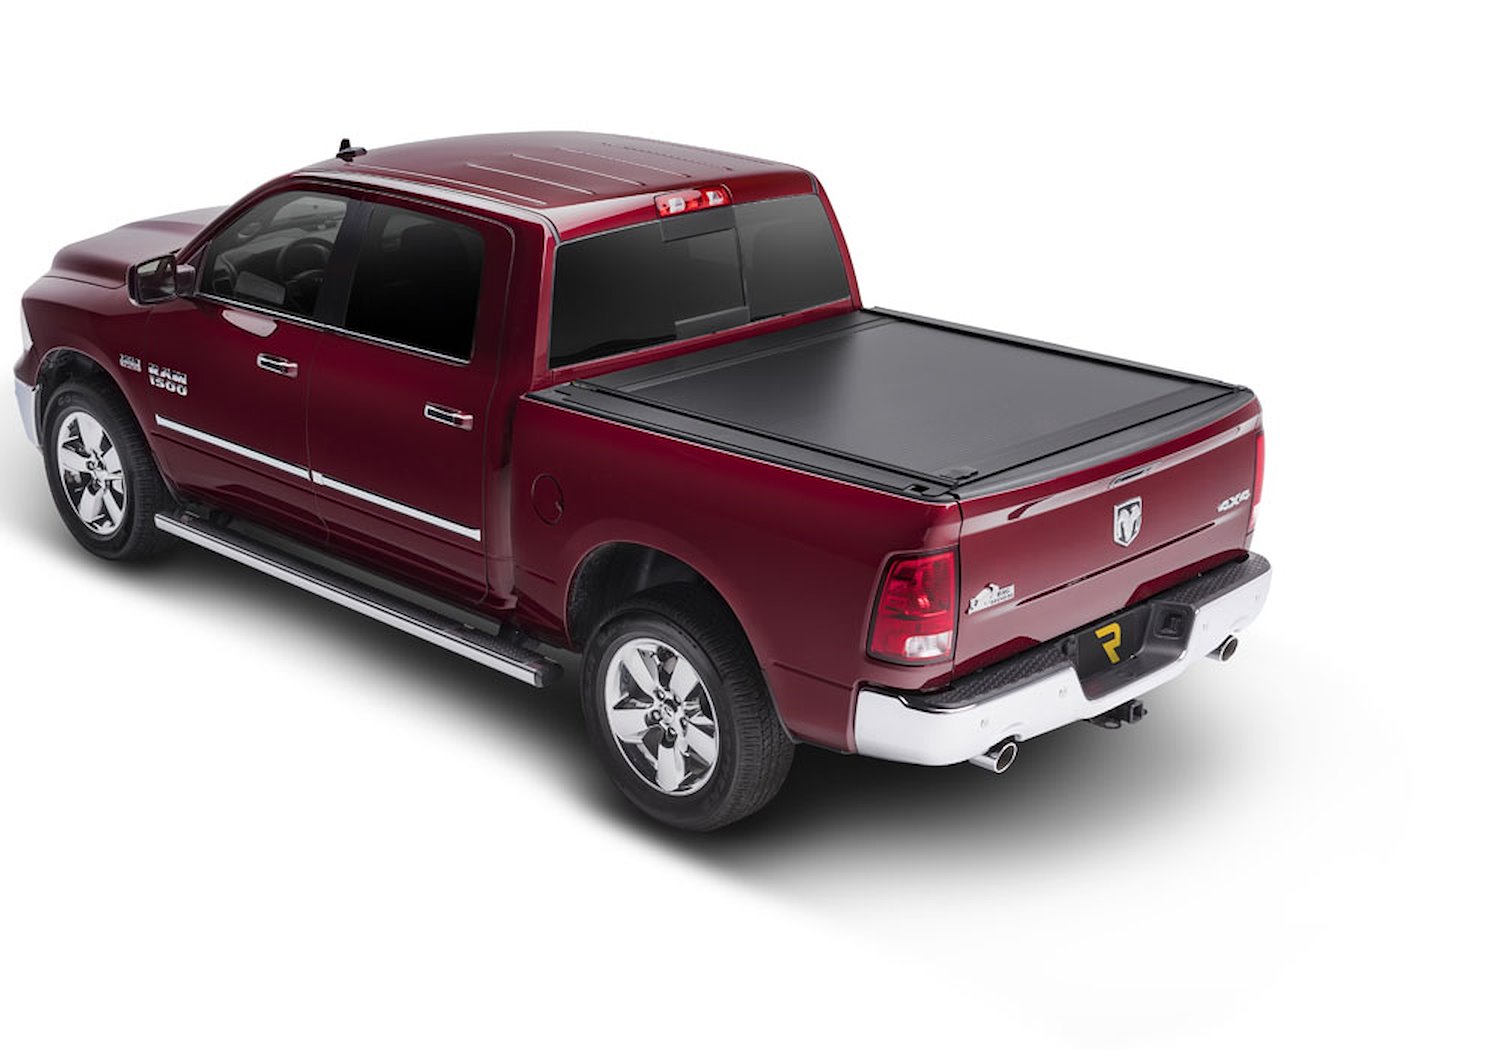 60245 RetraxONE MX Retractable Tonneau Cover Fits Select Ram 1500 6' 4" Bed without RamBox